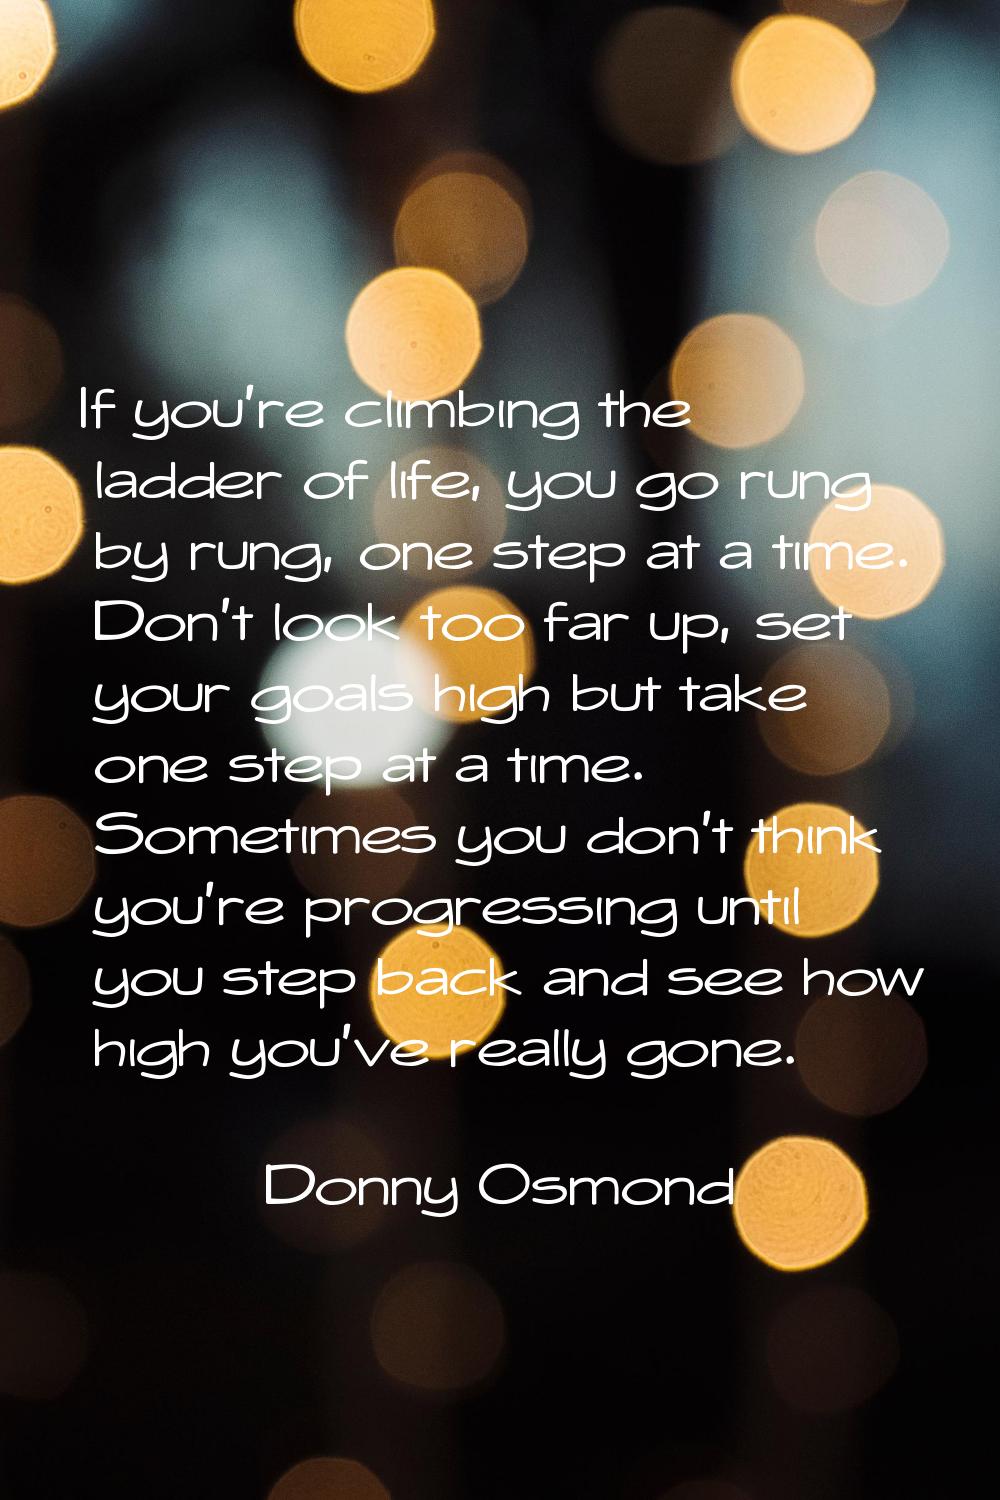 If you're climbing the ladder of life, you go rung by rung, one step at a time. Don't look too far 